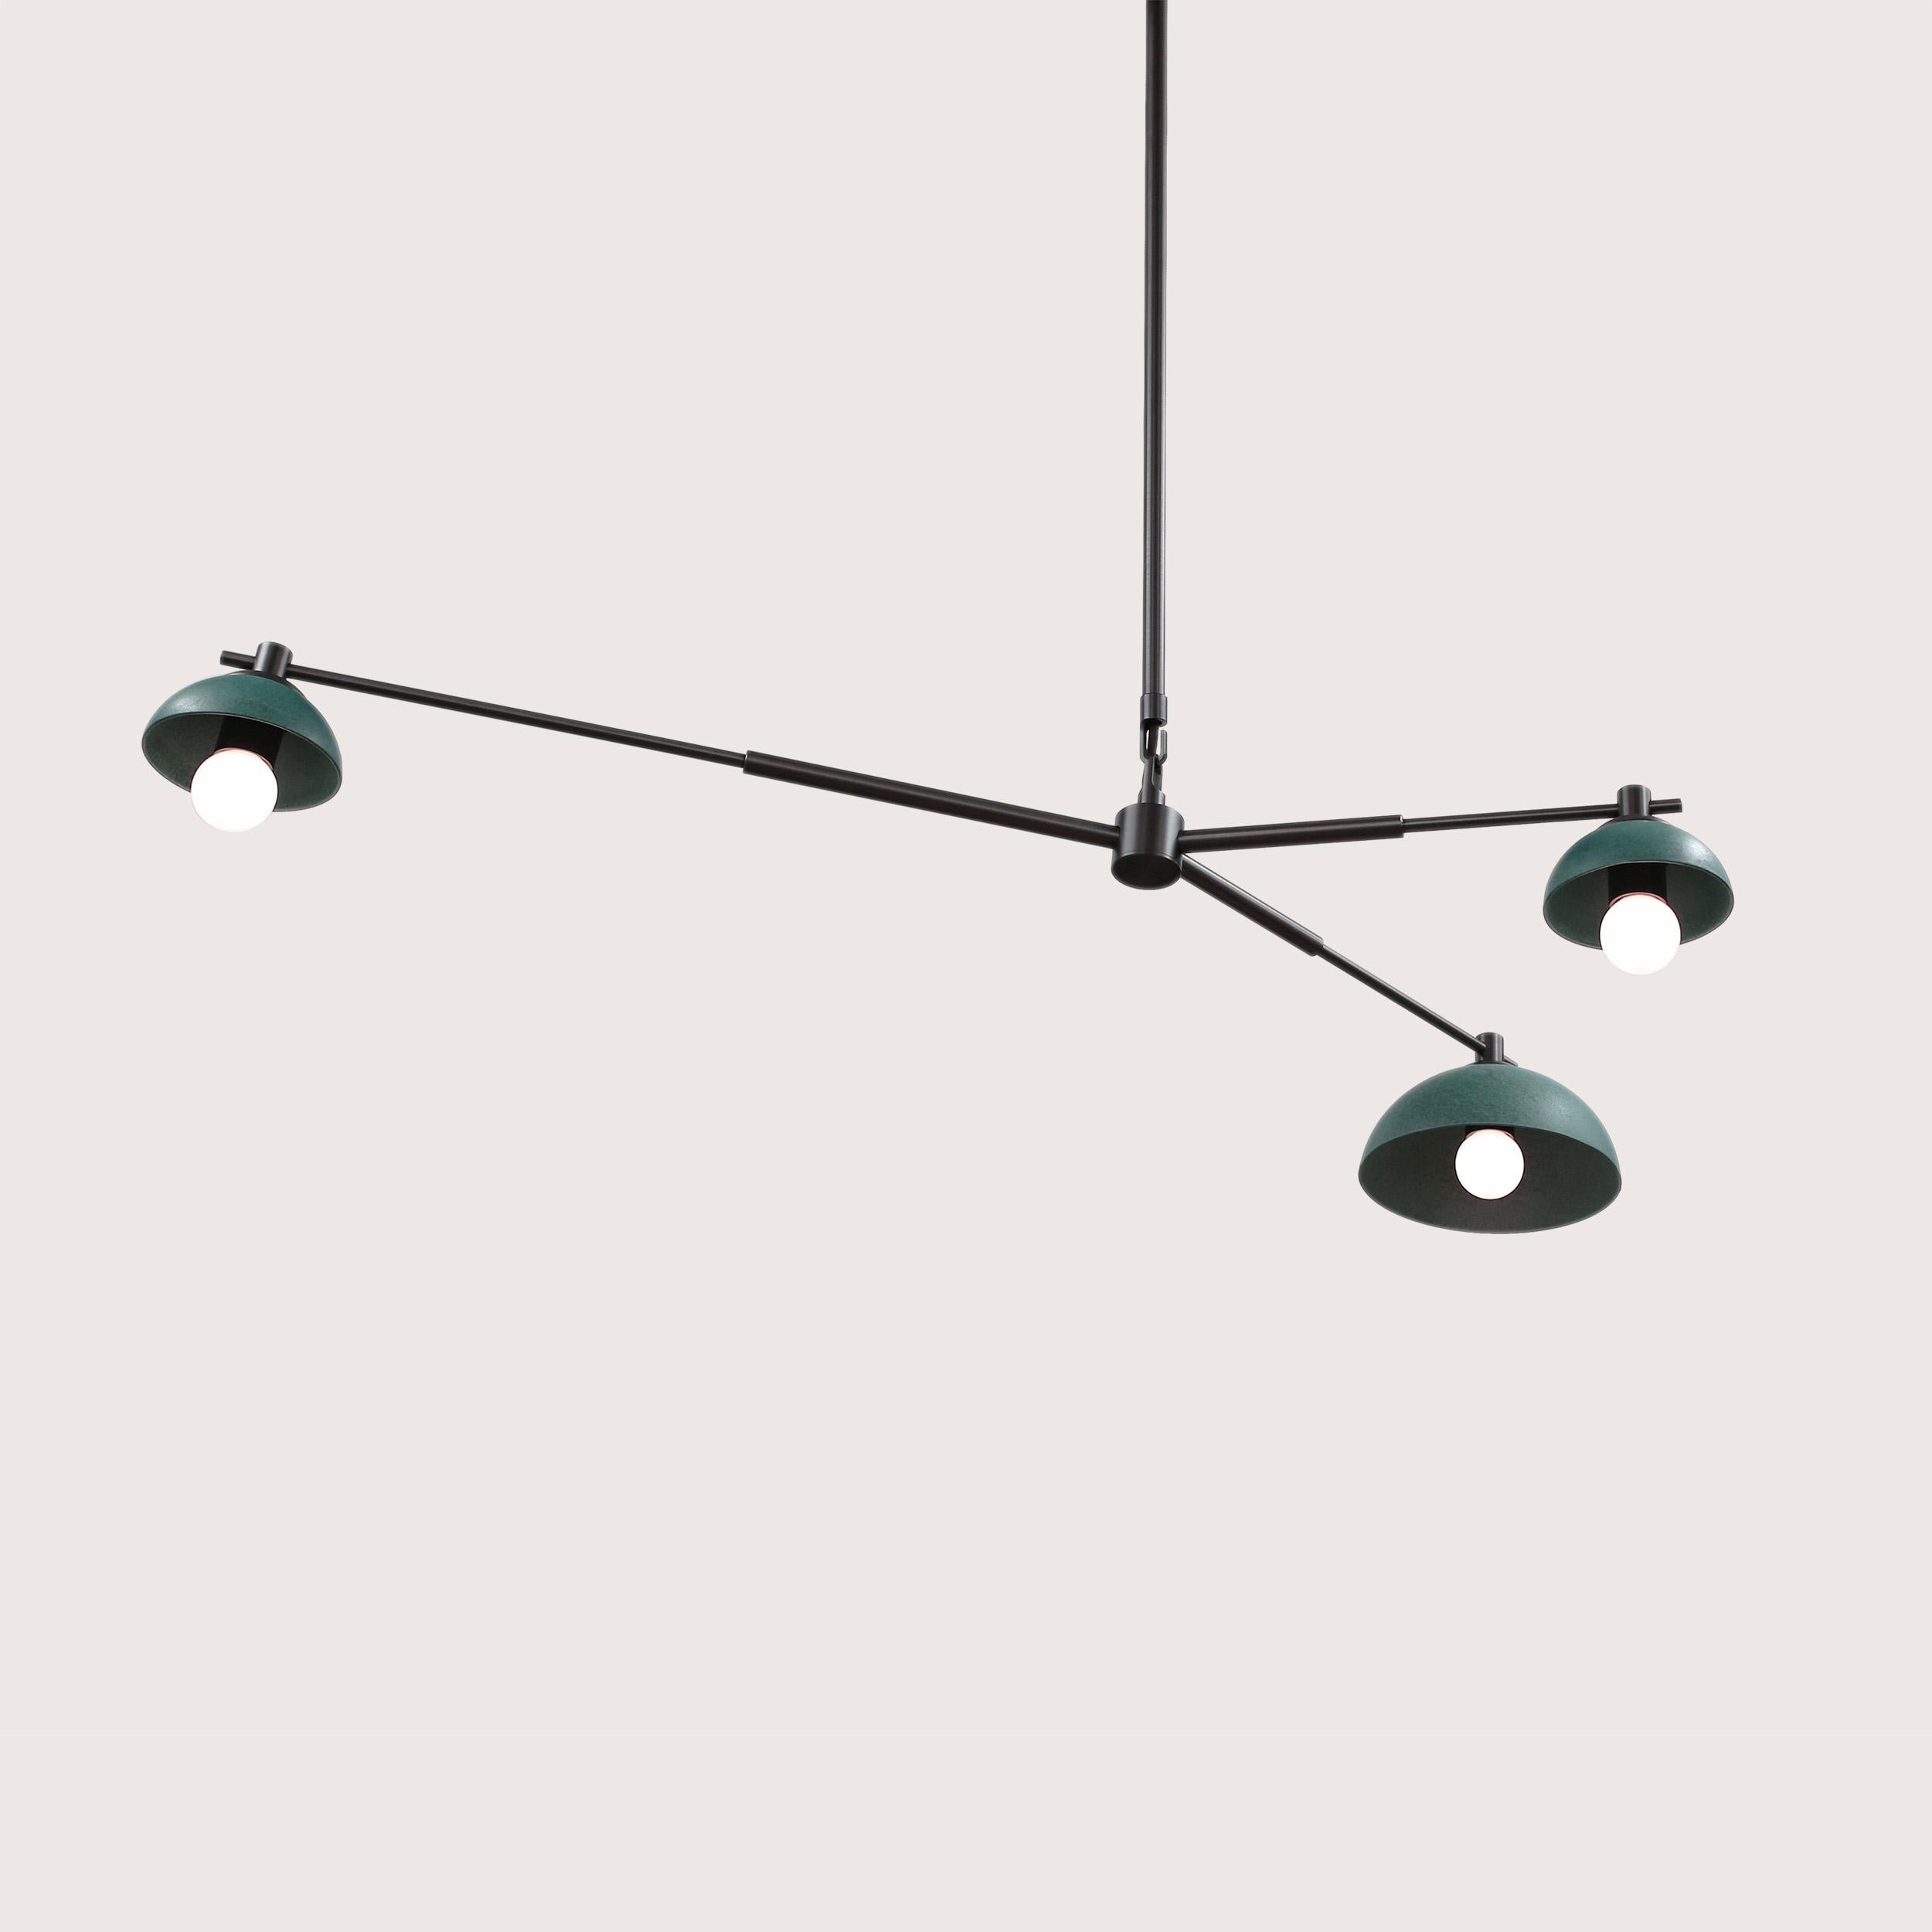 The Dixon ceiling fixture 3-light hangs at an angle with different sized terracotta reflectors for an exploration of balance and symmetry. The reflectors are hand-cast from terracotta and glazed with either a matte or textured lichen glaze. The